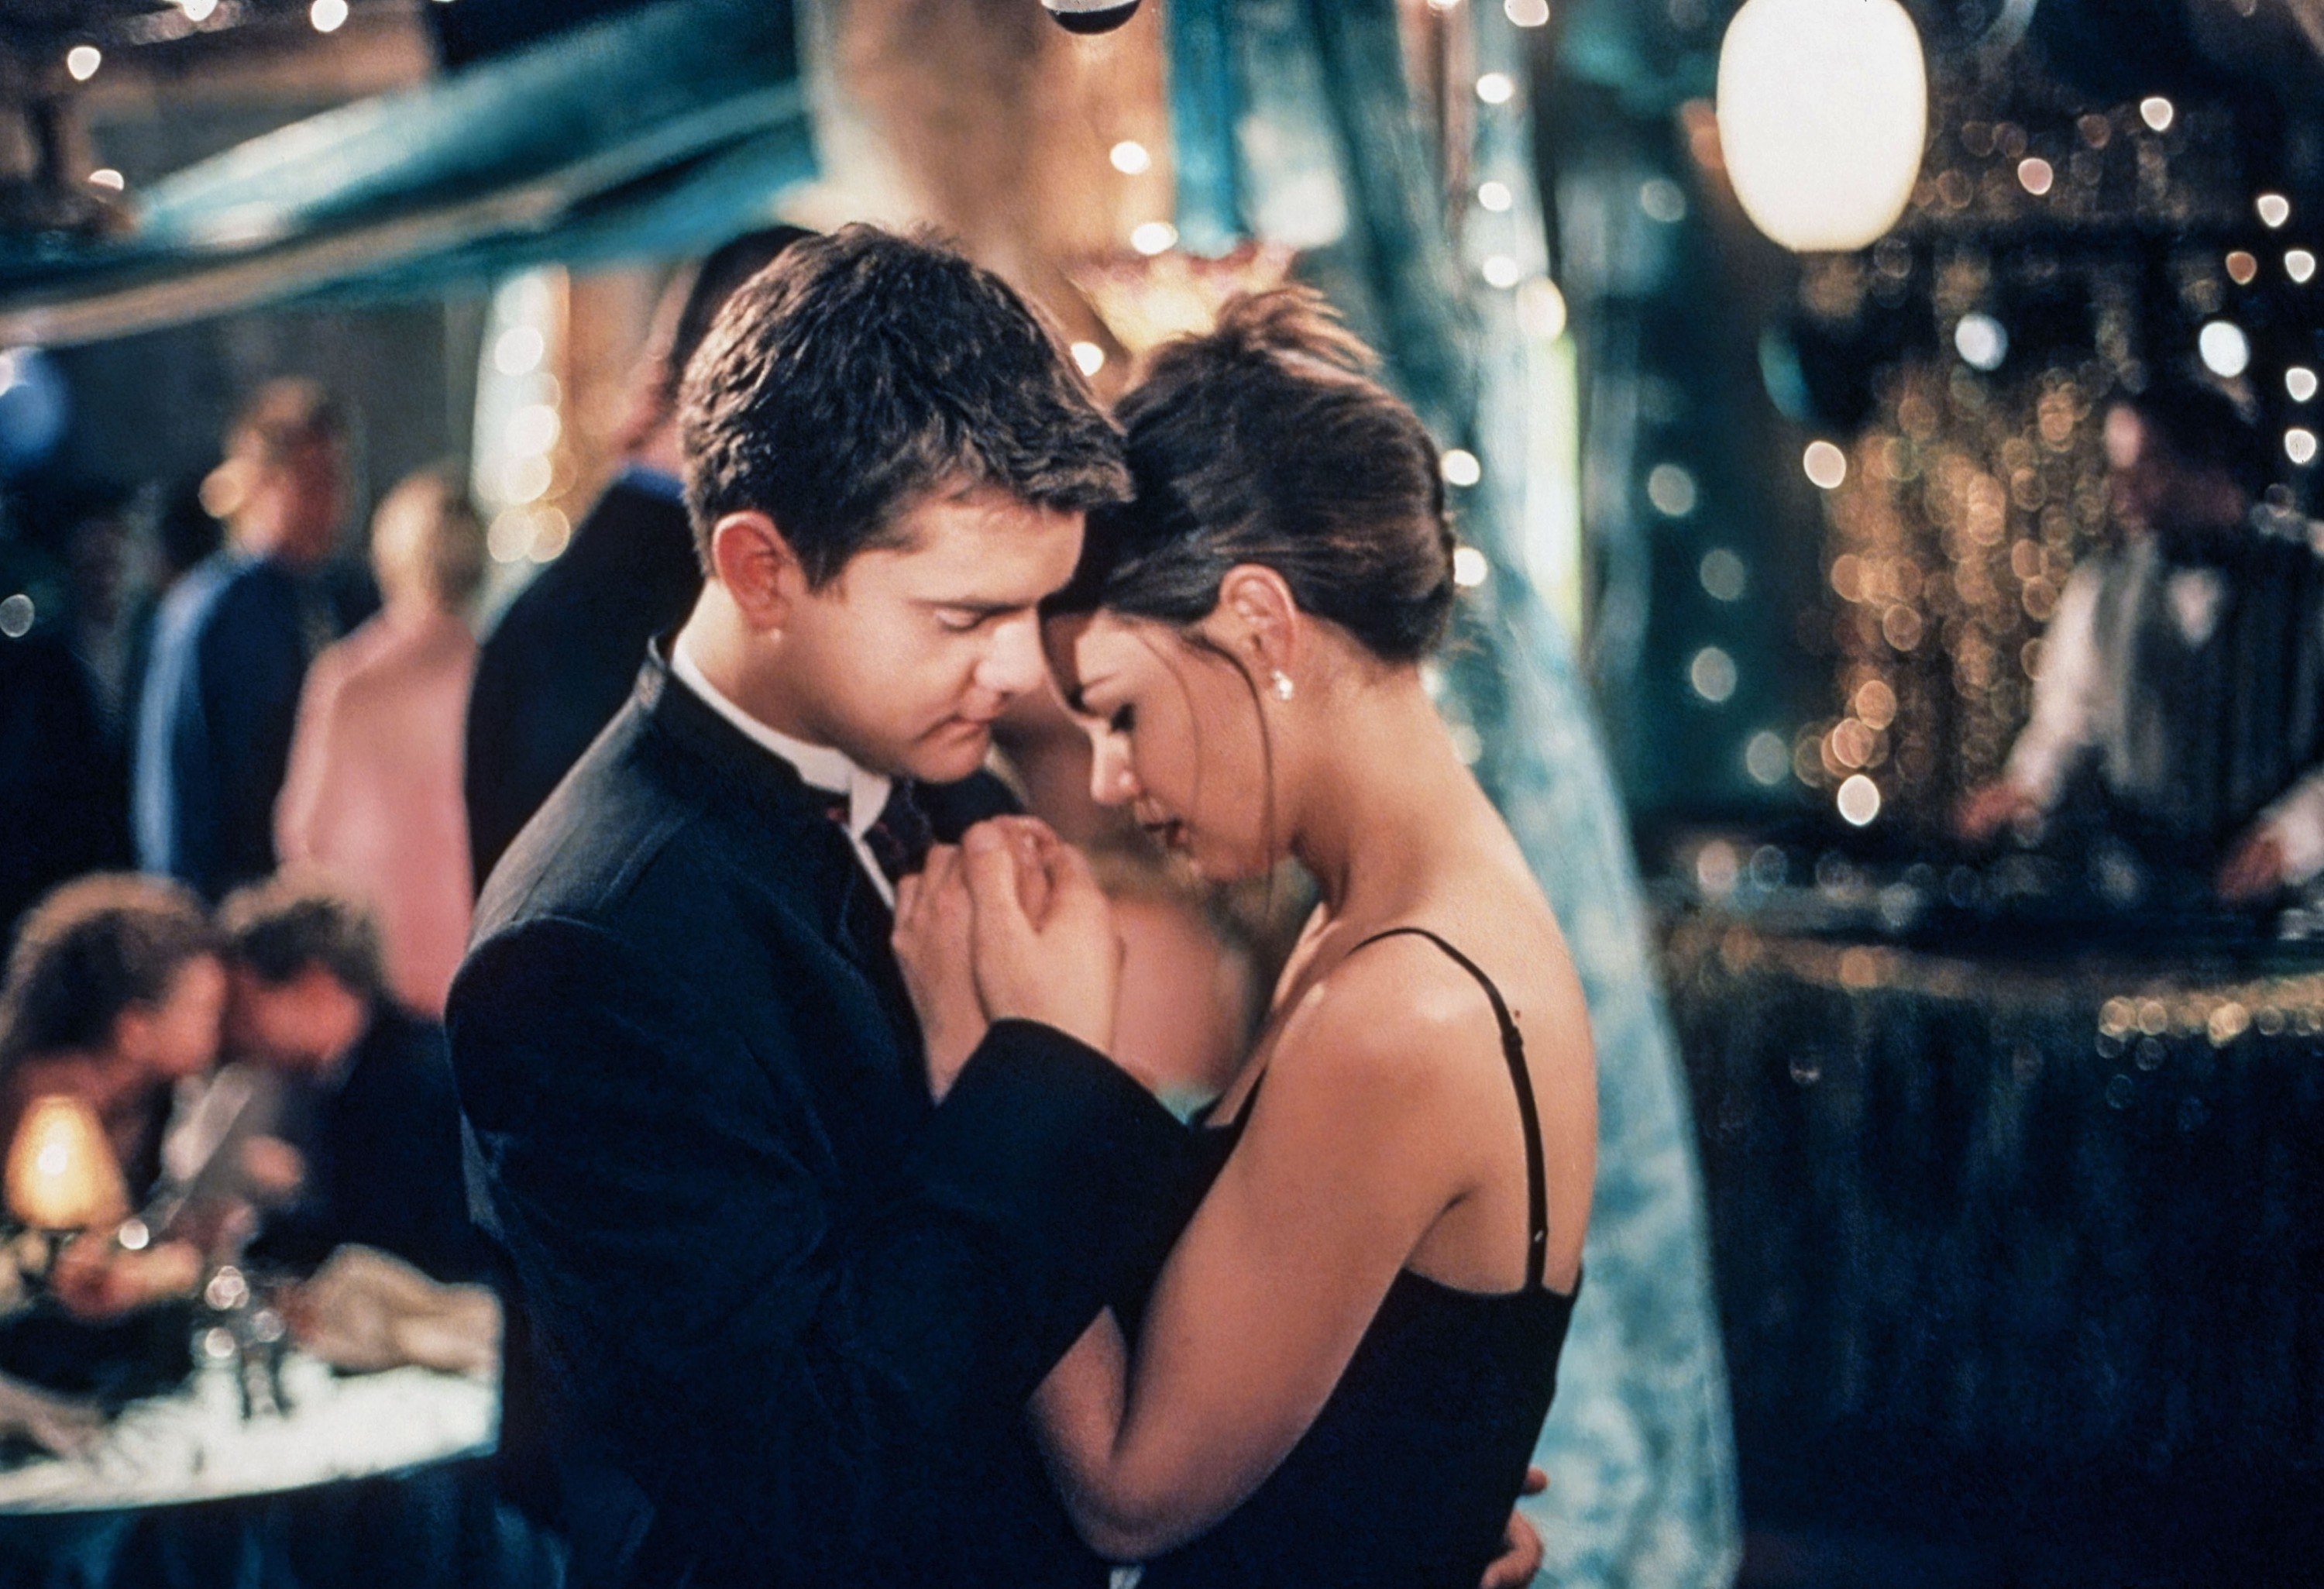 Pacey and Joey dancing at prom